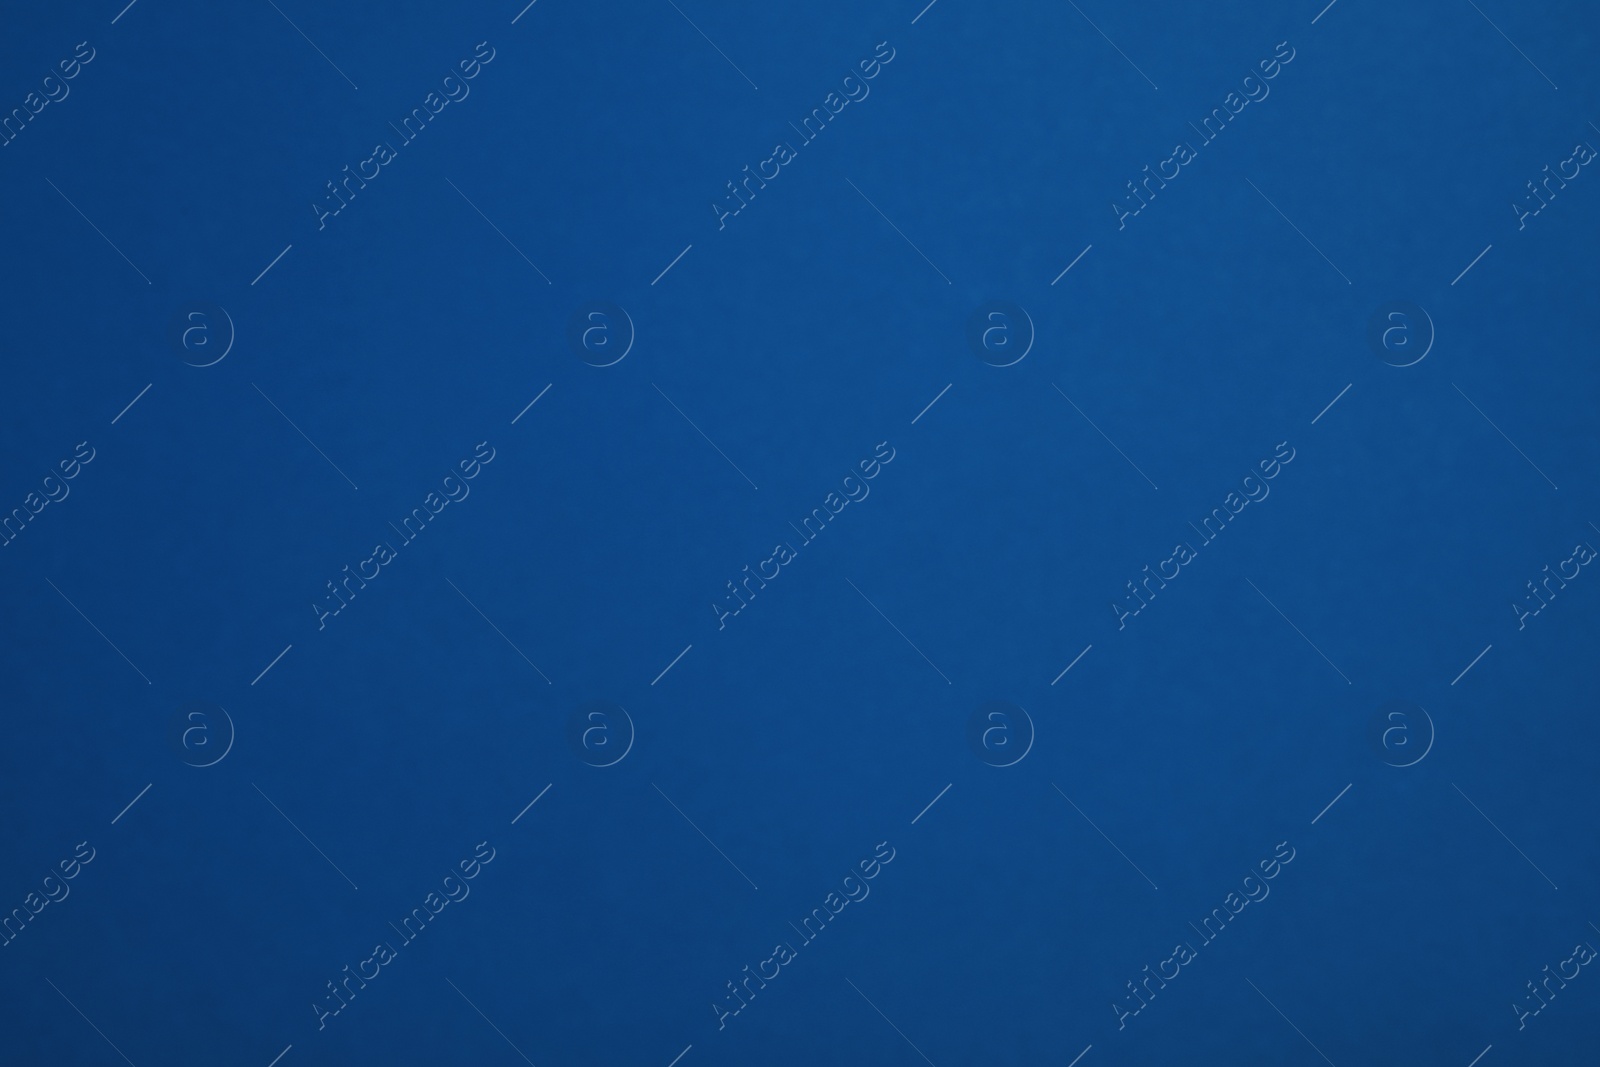 Photo of Color of the year 2020 (Classic blue) as background. Space for text